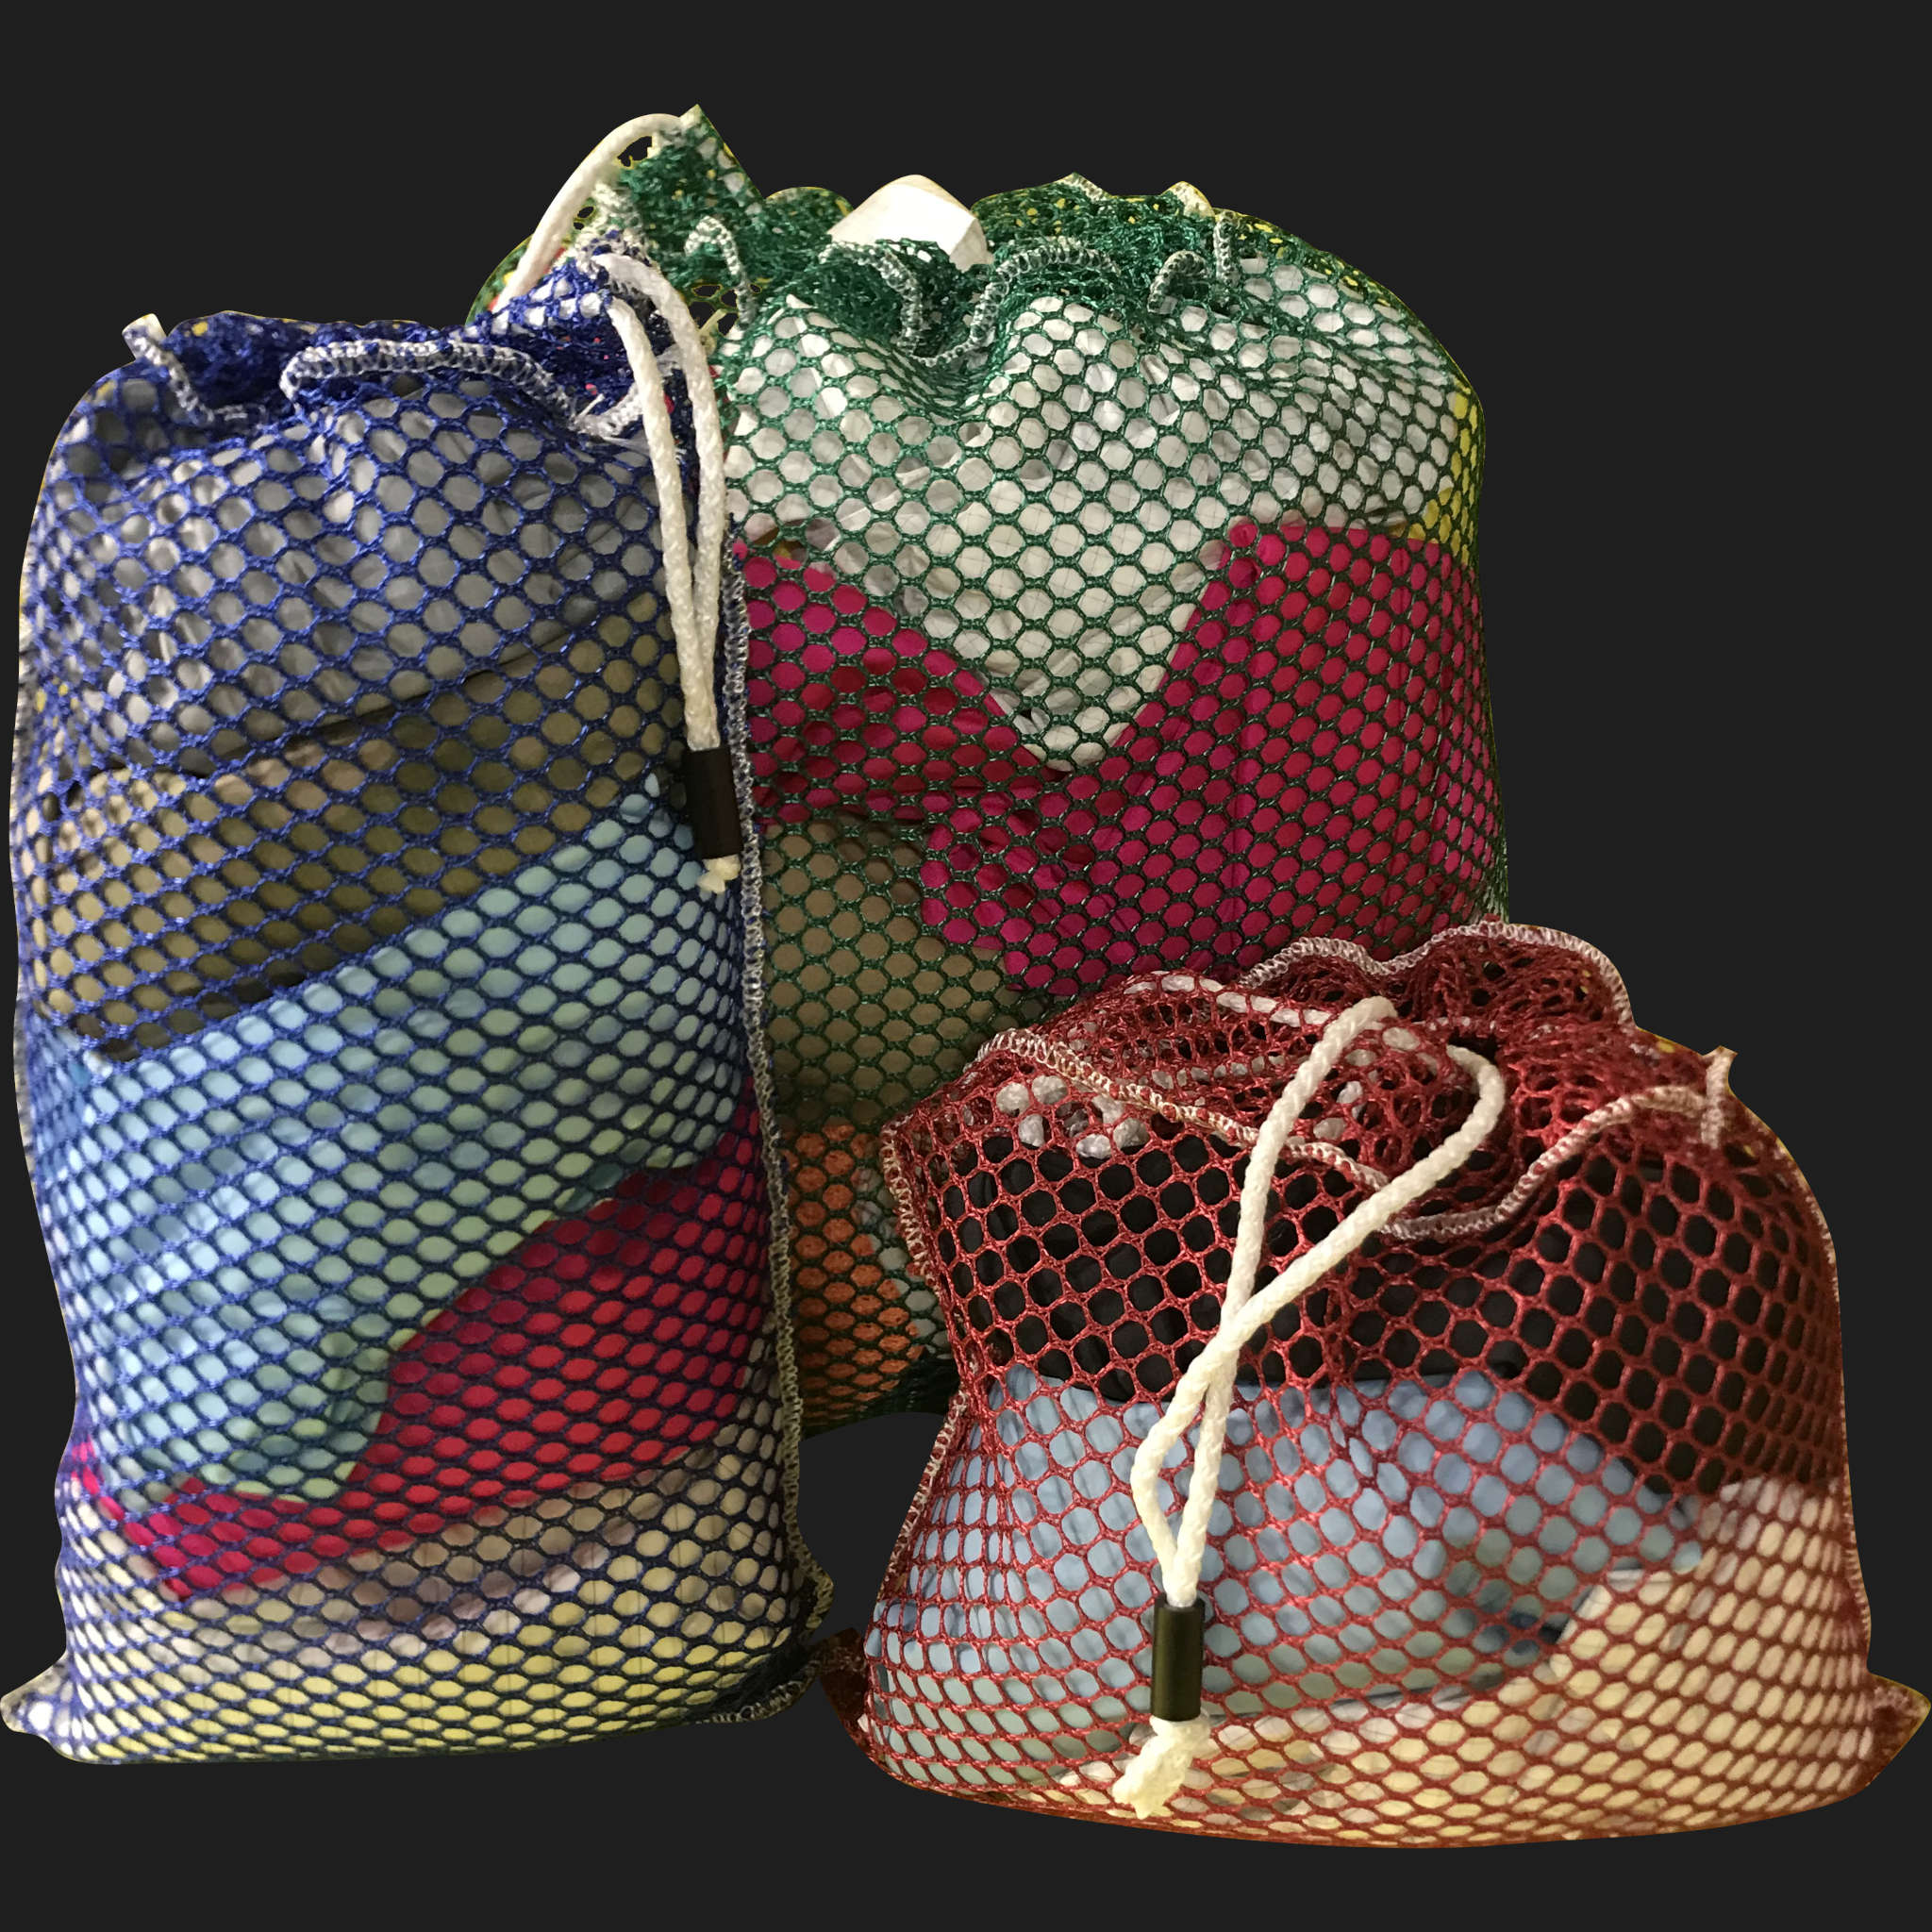 42" x 66" Customized Mesh-Net-Laundry Bags Heavy Duty with Cord and barrellock closure